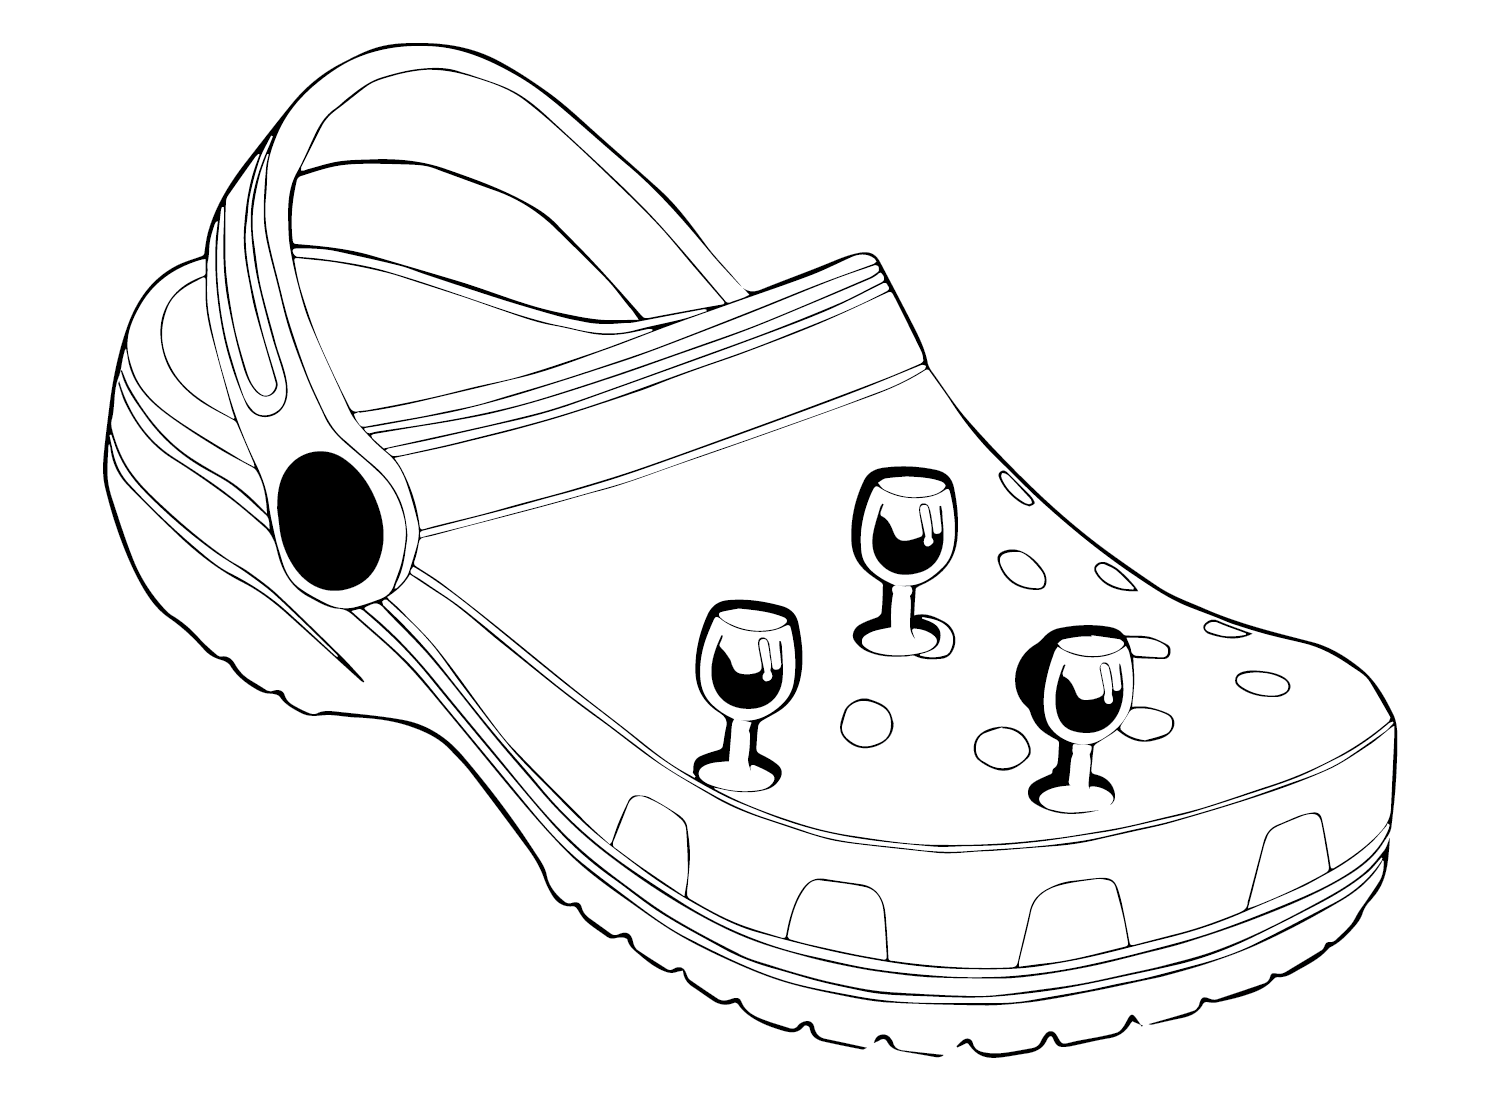 Crocs Drawing Coloring Page - Free Printable Coloring Pages